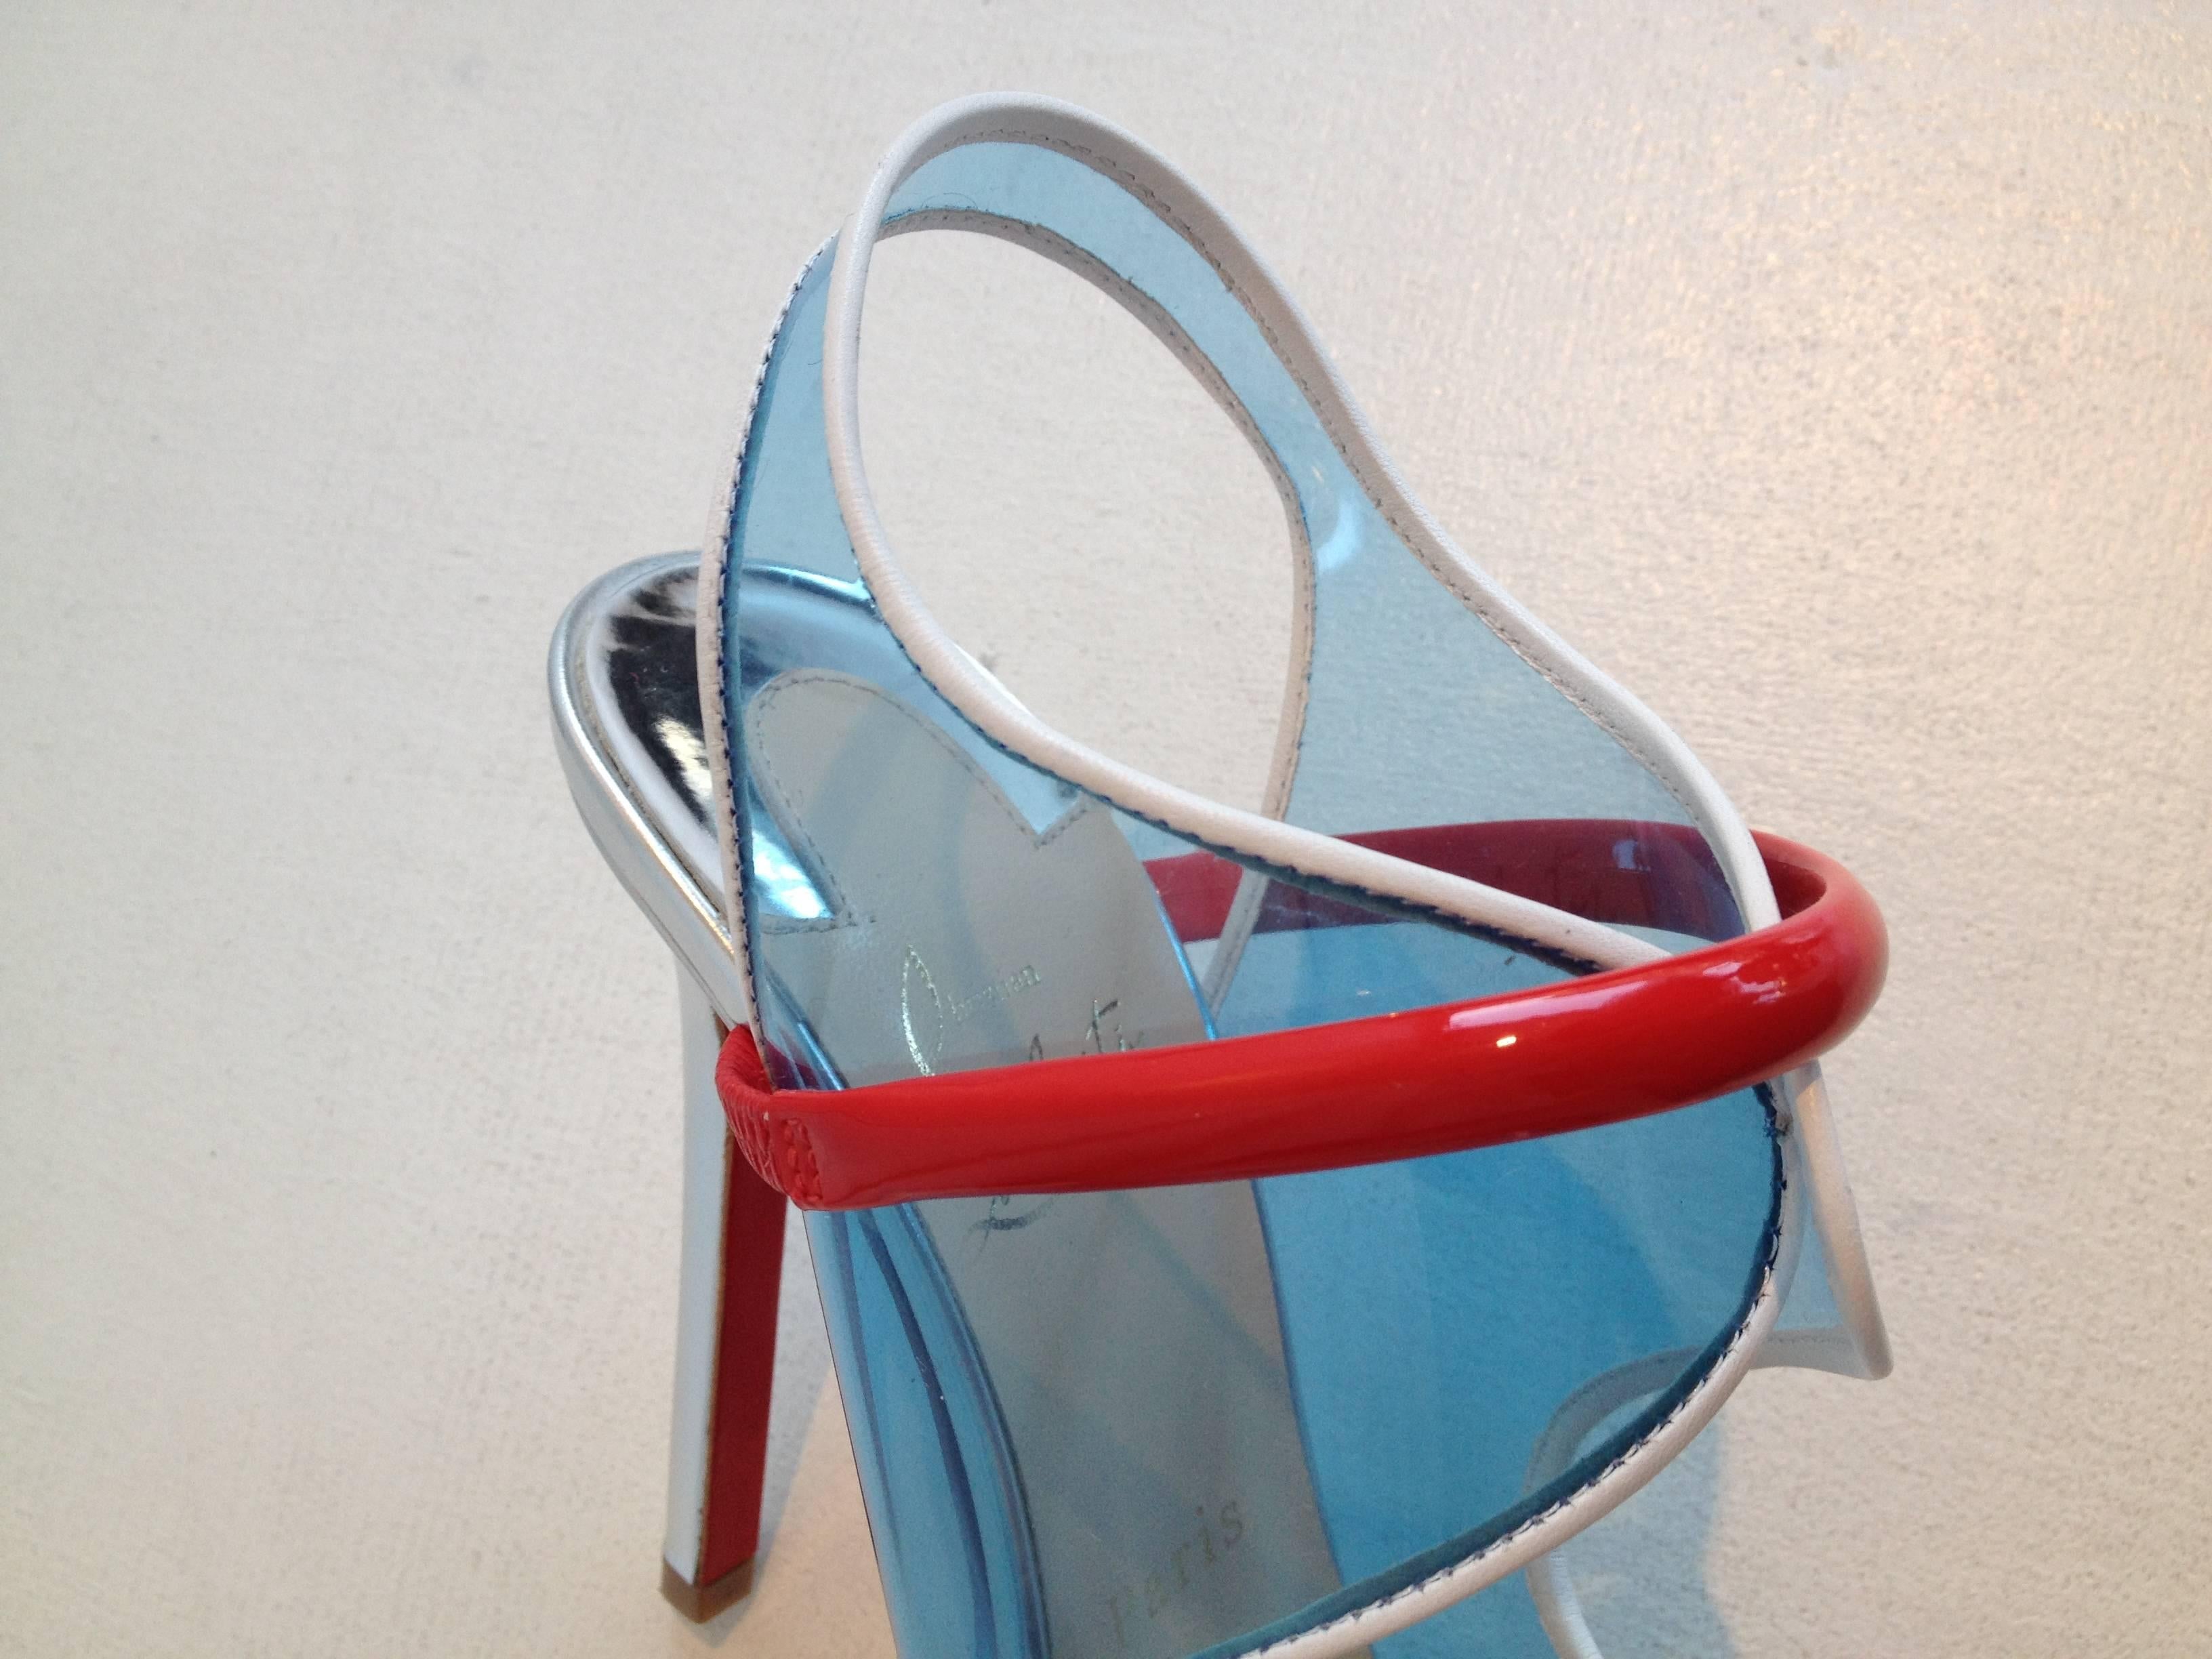 Christian Louboutin Translucent Blue Heels Size 36.5 (6) For Sale 2